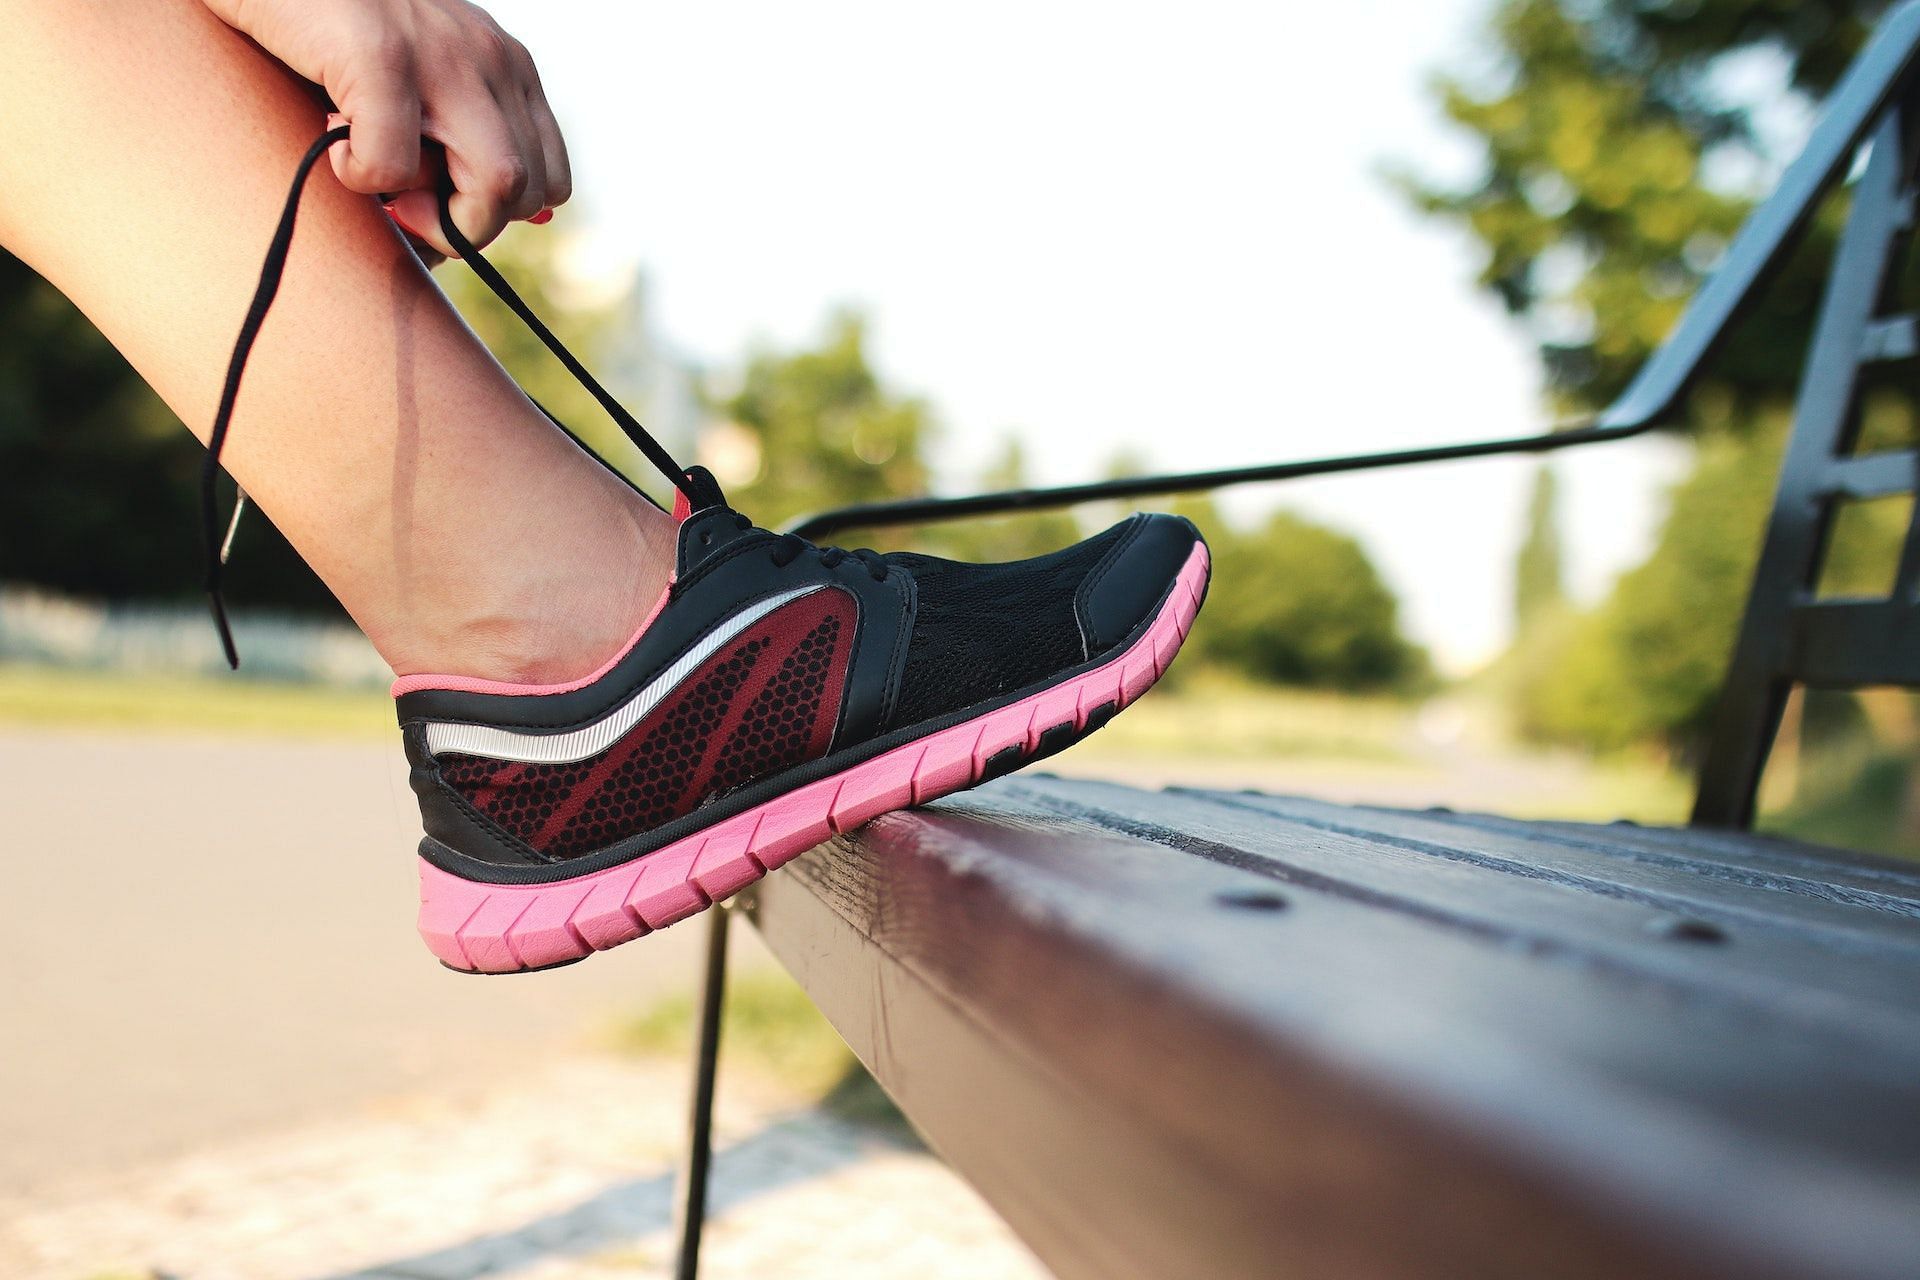 Wrong footwear can lead to pain. (Photo via Pexels/Pixabay)